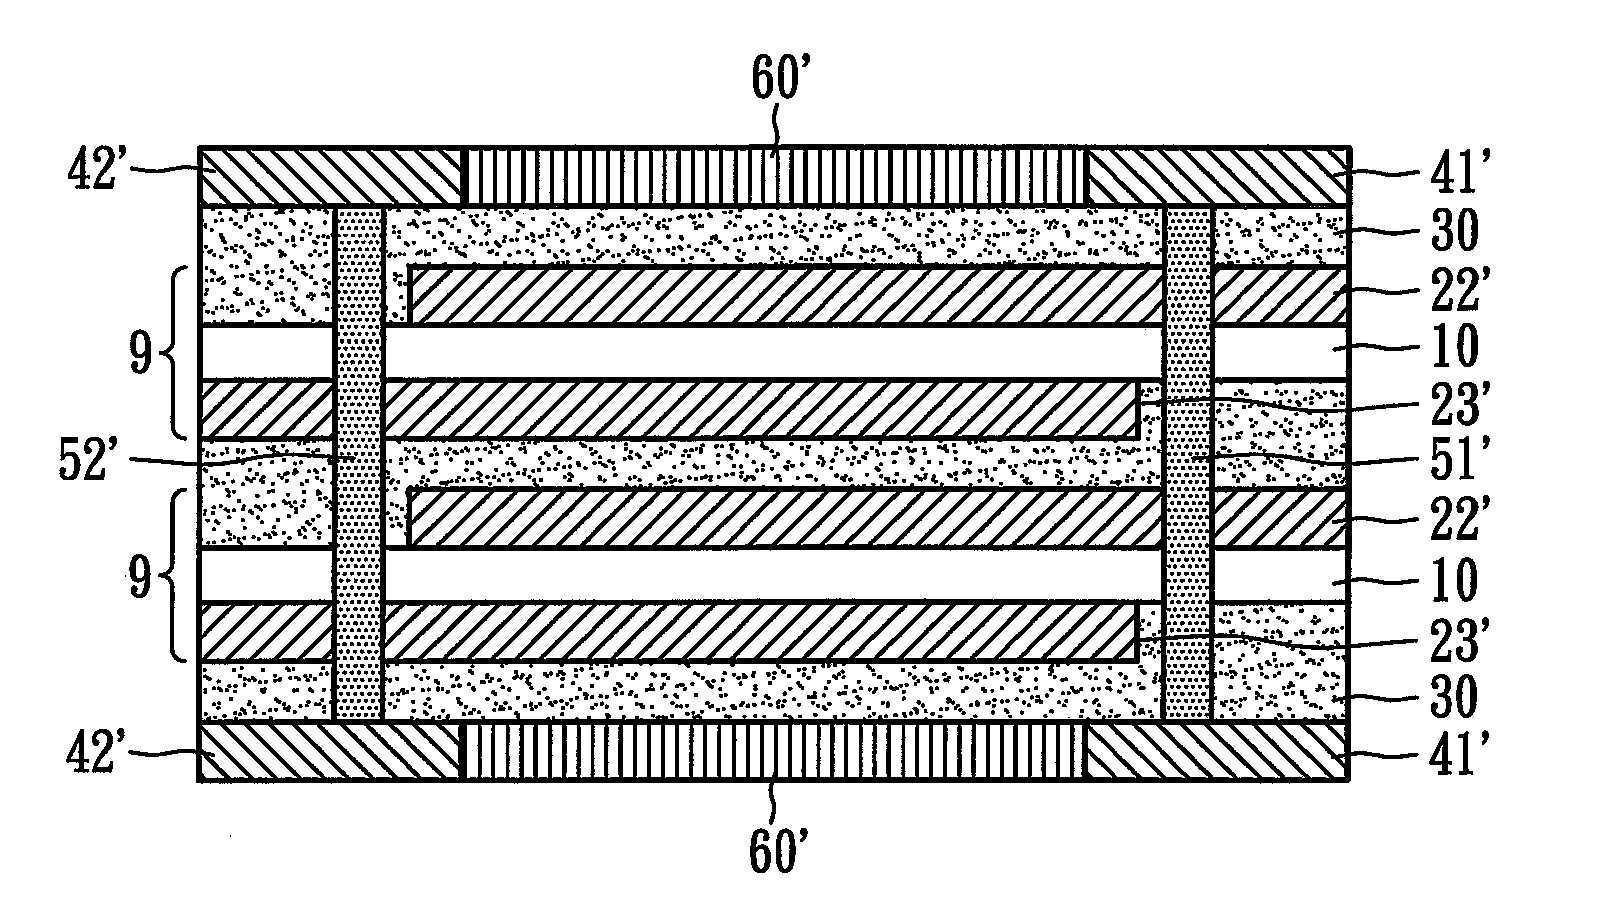 Surface-mounted over-current protection device